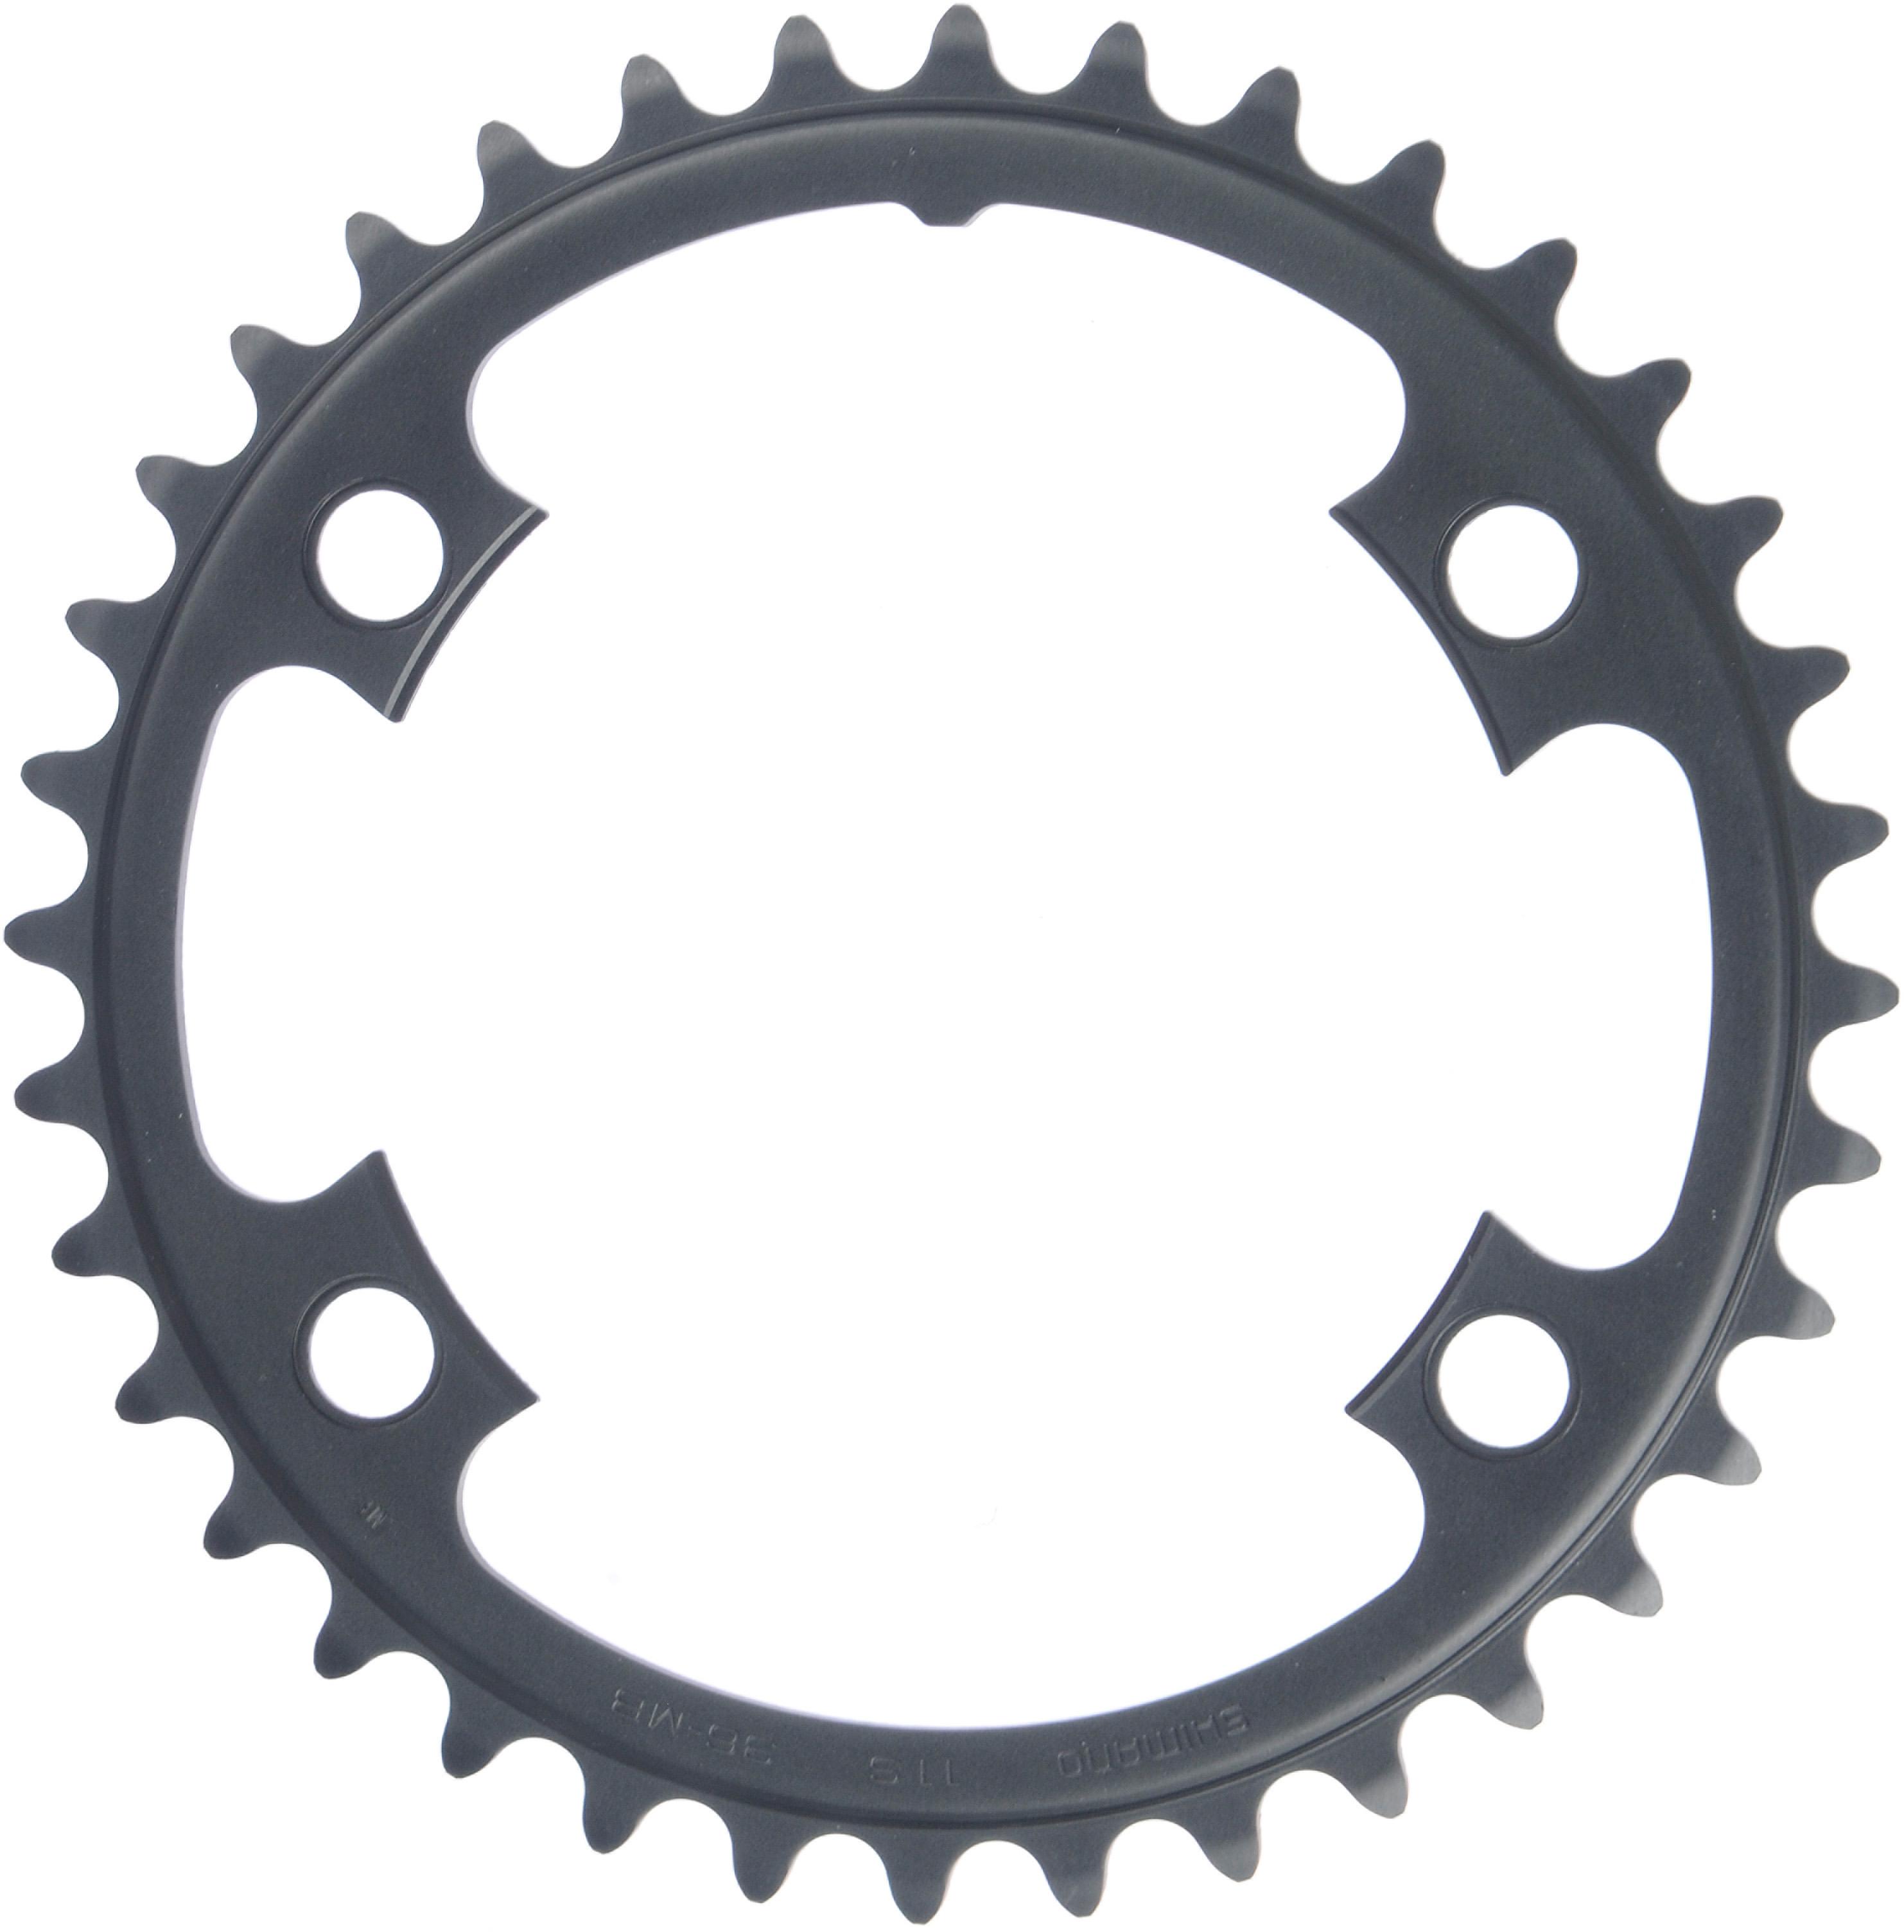 Shimano Ultegra Fc6800 11sp Double Chainrings  Grey